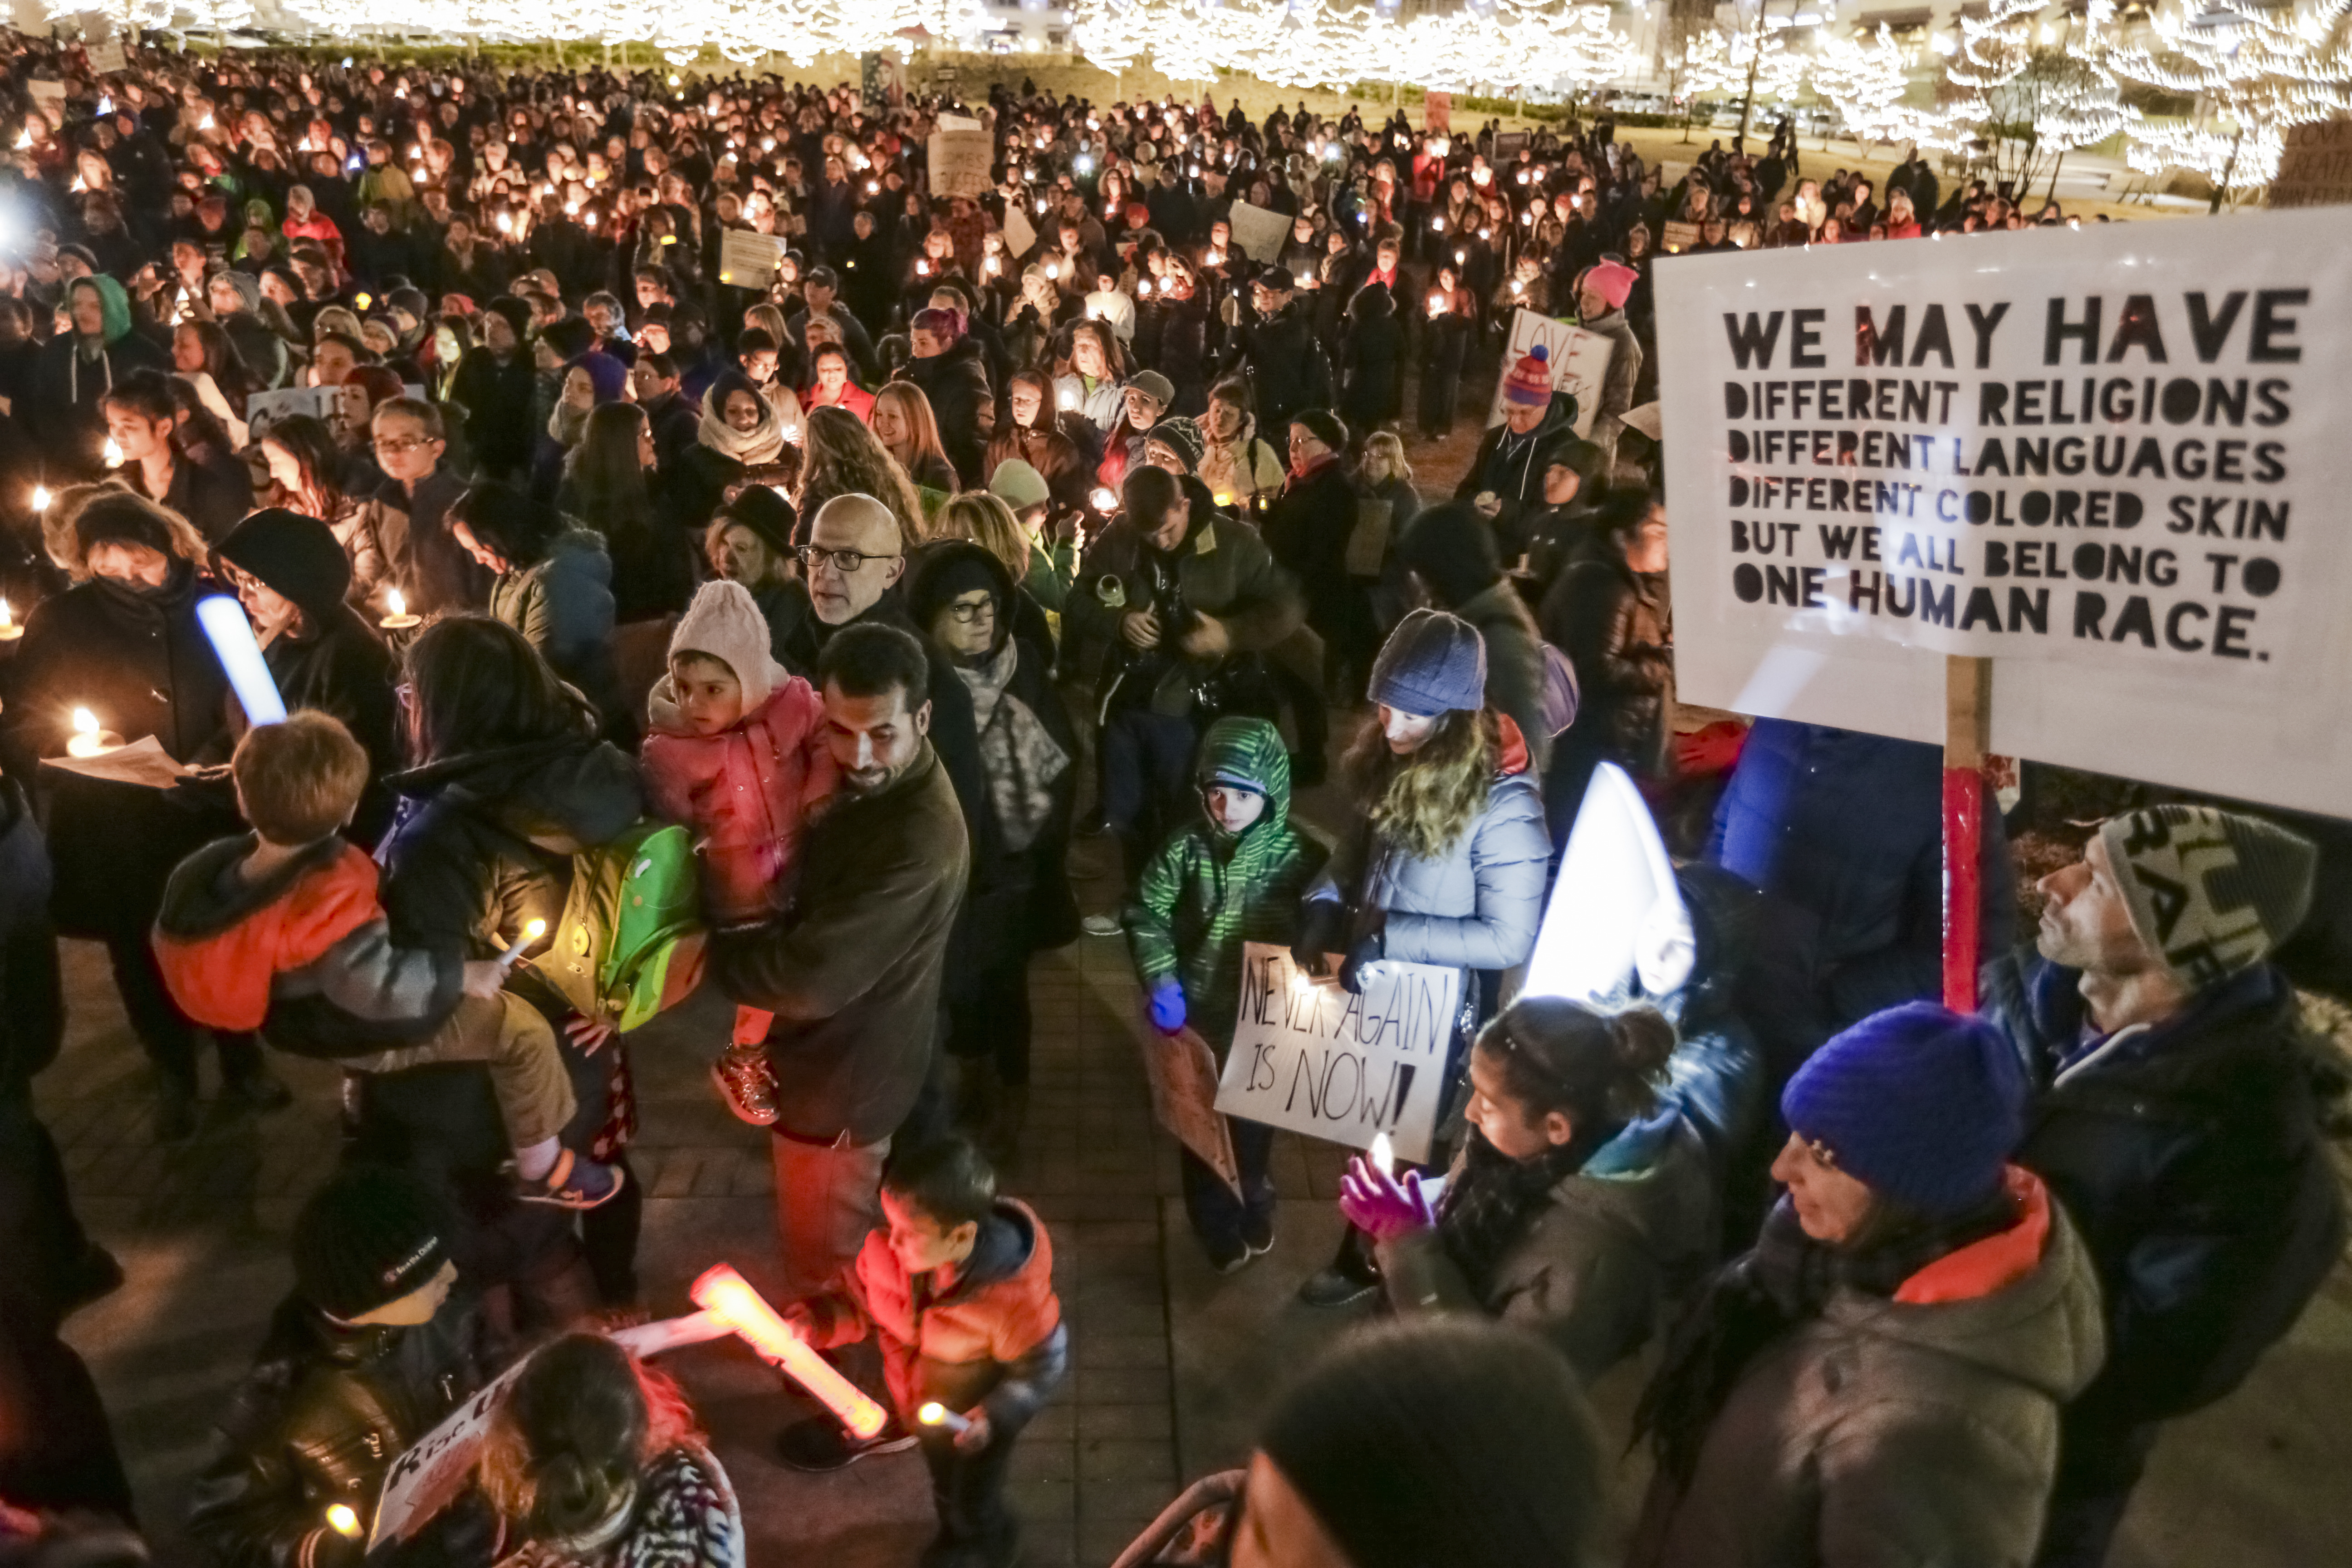 Participants gather with signs during a multi-faith candle light vigil in support of refugees and immigrants, held Tuesday, Jan. 31, 2017, in Omaha, Neb. (AP Photo/Nati Harnik)